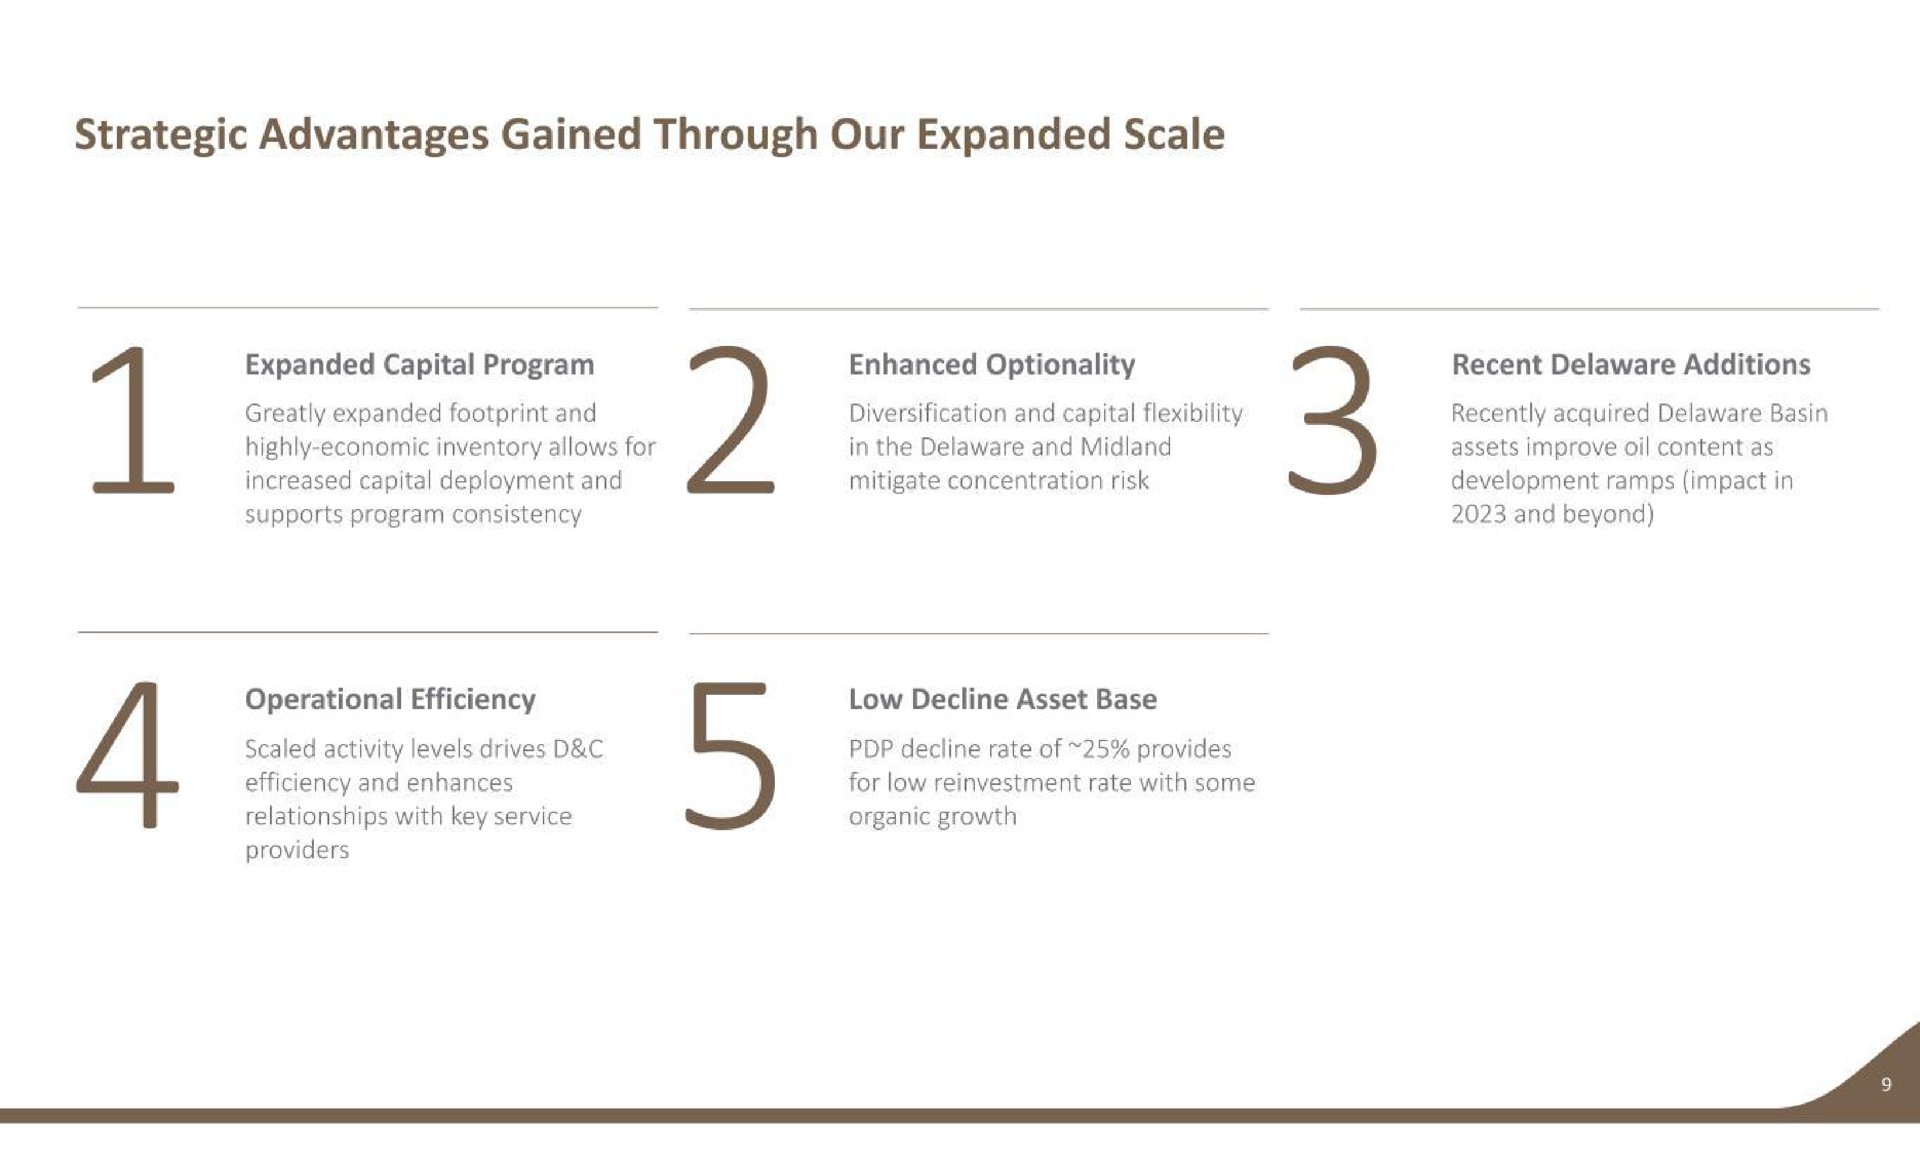 strategic advantages gained through our expanded scale expanded capital program enhanced optionality recent additions assets improve oil content as operational efficiency low decline asset base scaled activity levels drives efficiency and enhances relationships with key service decline rate of provides organic growth | Earthstone Energy